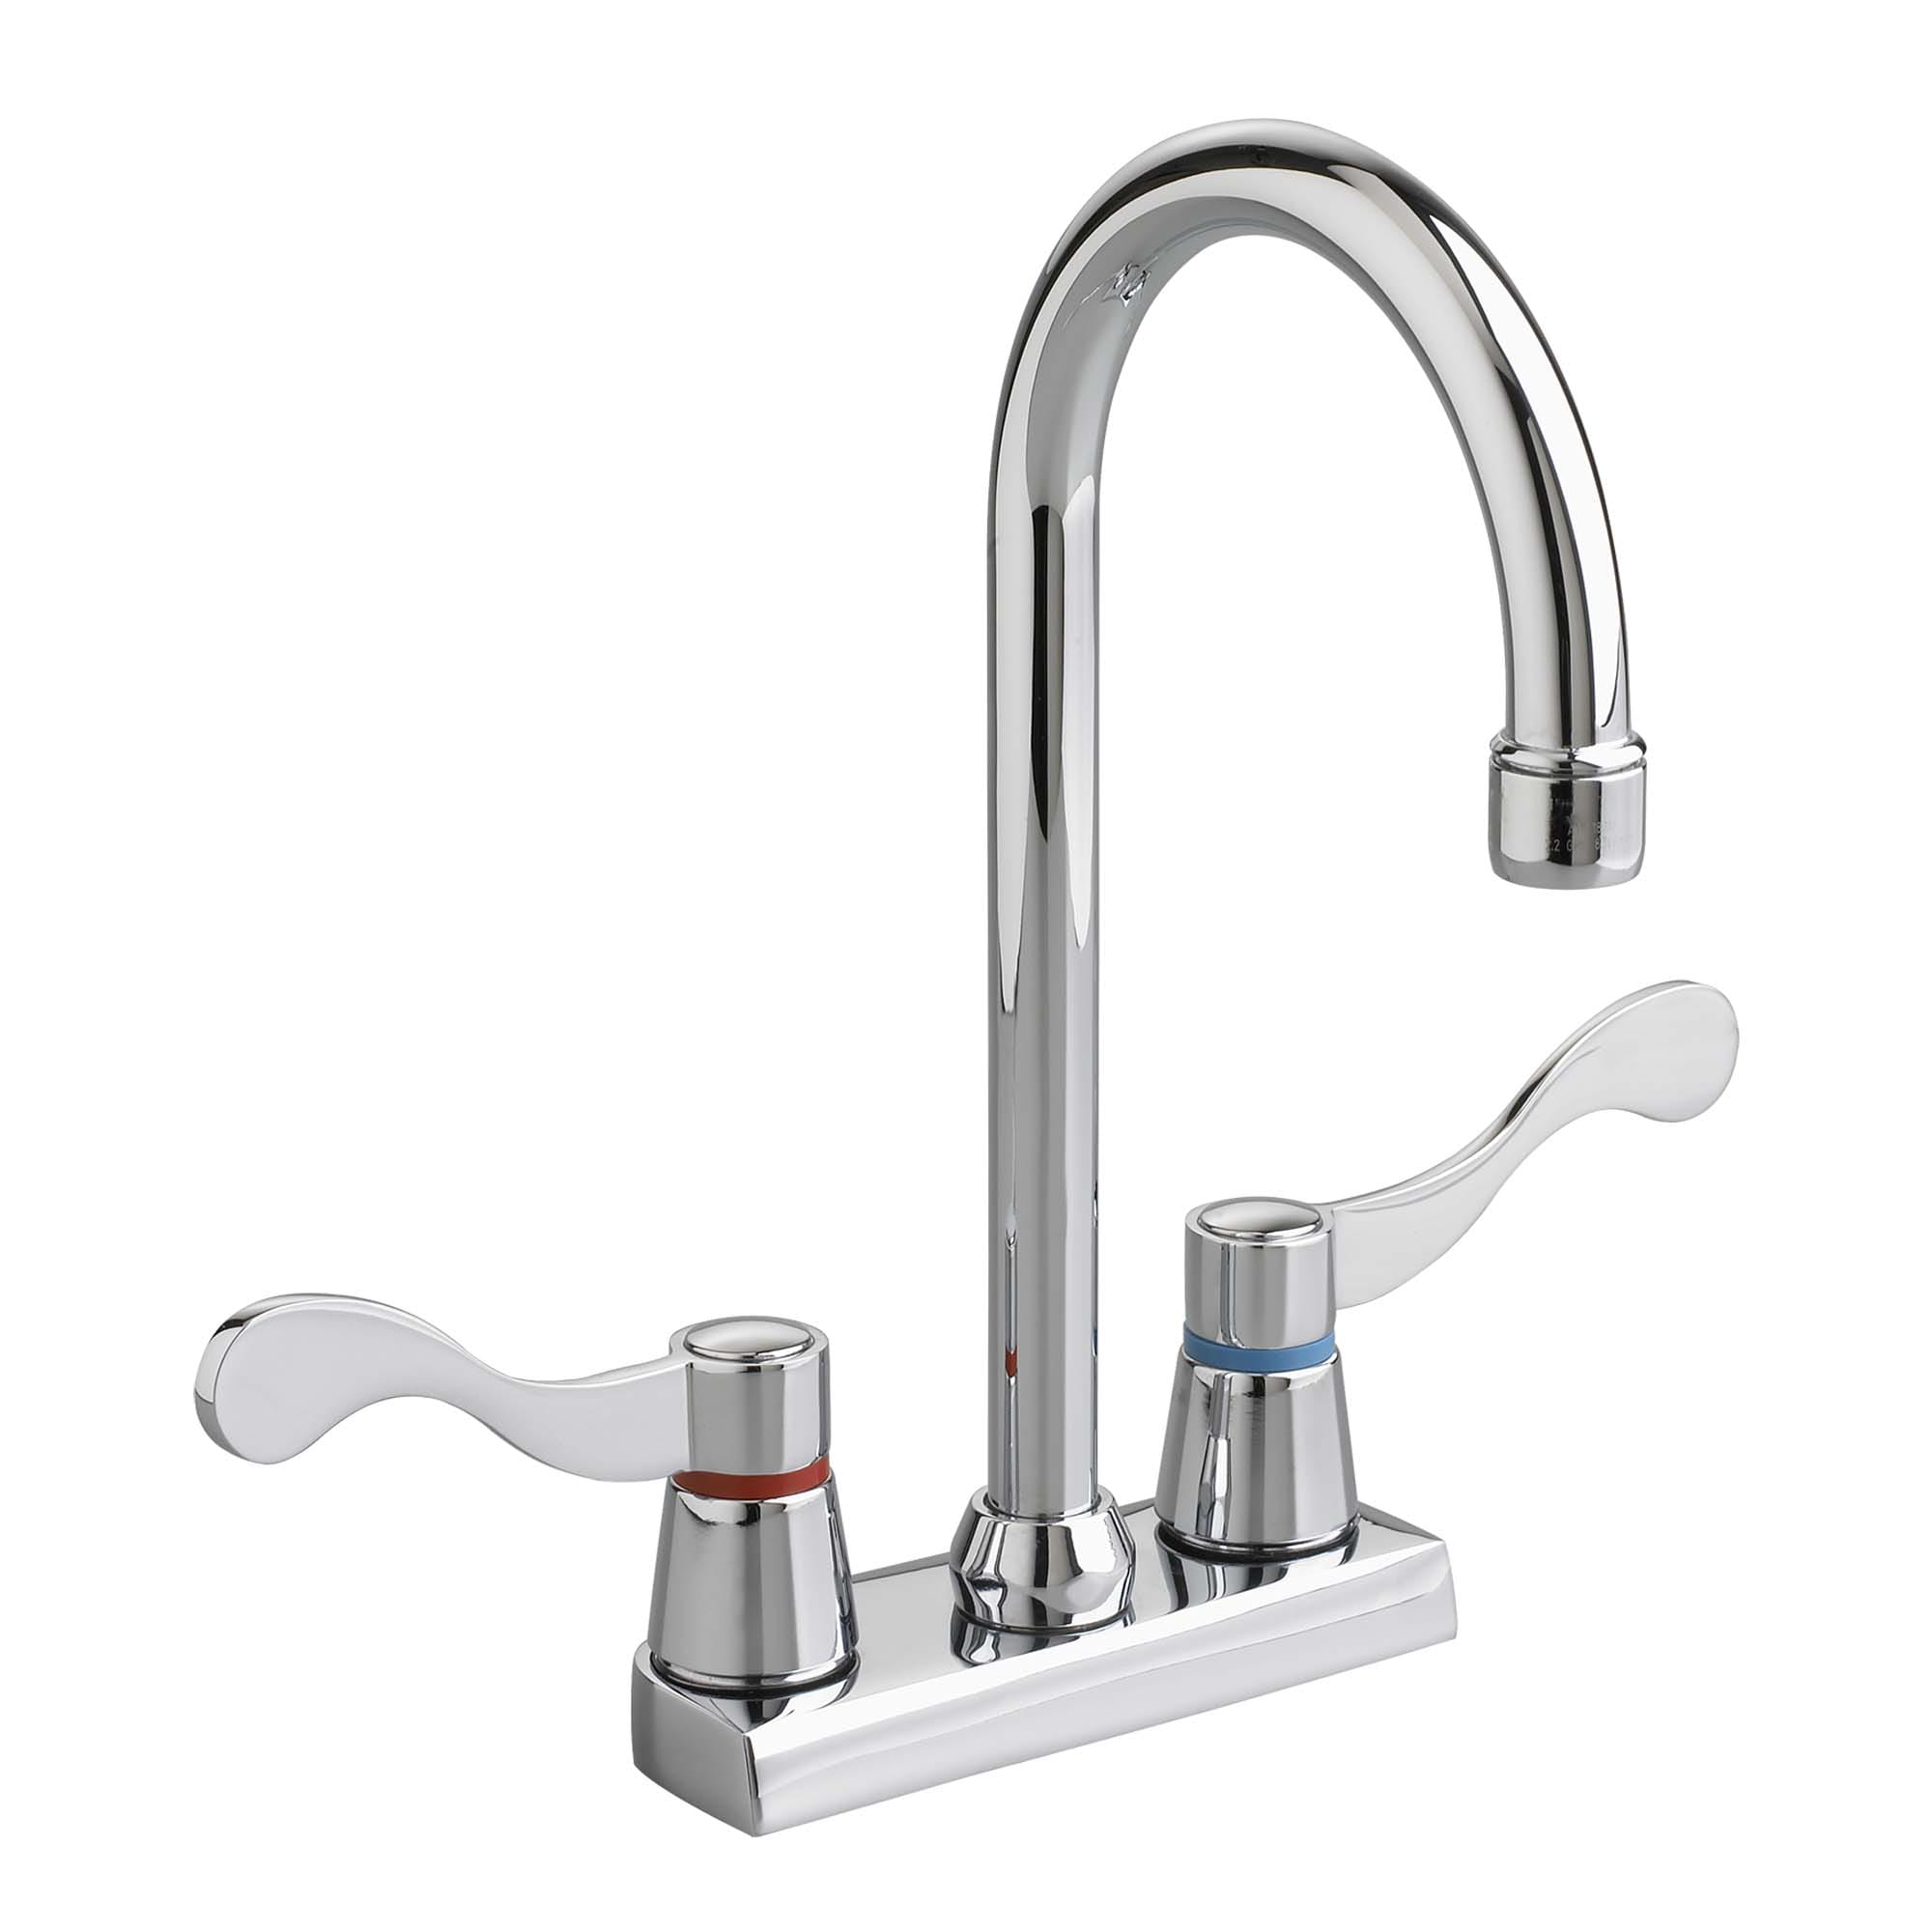 American Standard 5400000.002 Heritage Centerset Lav Faucet In Chrome 5B2 